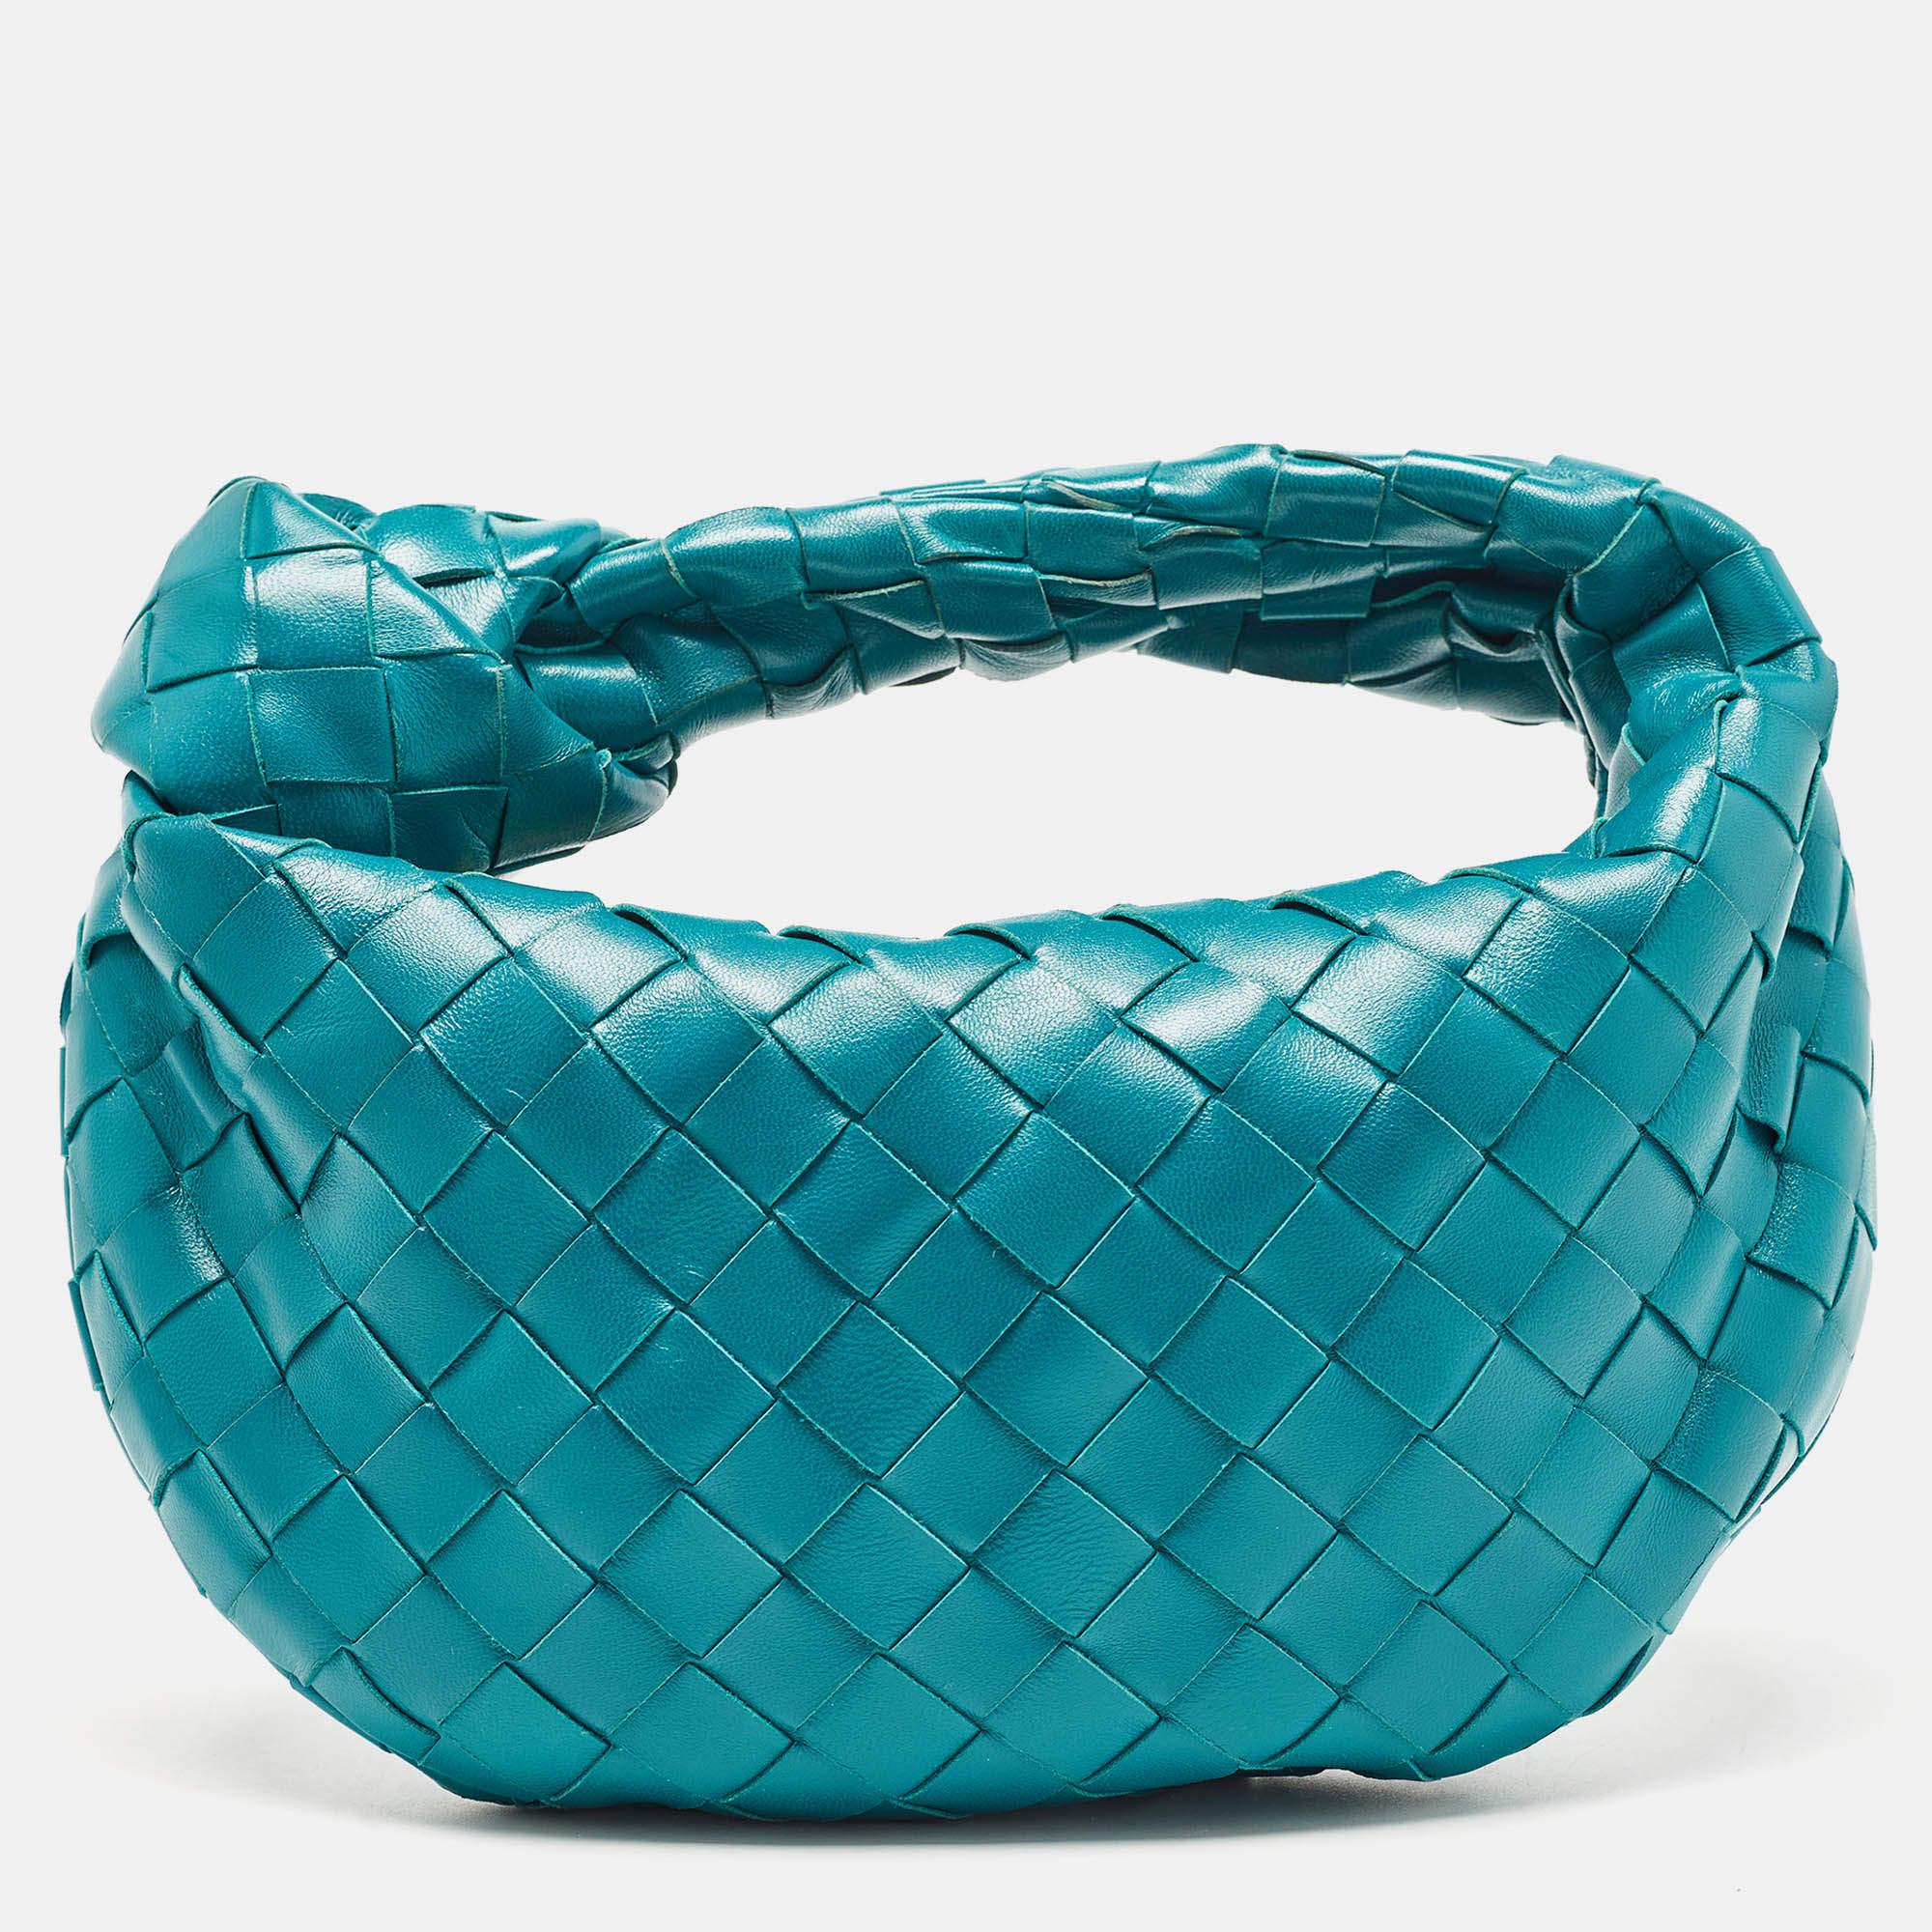 This Bottega Veneta mini Jodie bag is crafted from leather using their signature Intrecciato weaving technique, flaunting a seamless silhouette. This bag, personifying elegance and subtle charm, is held by a knotted handle. Brimming with artistry